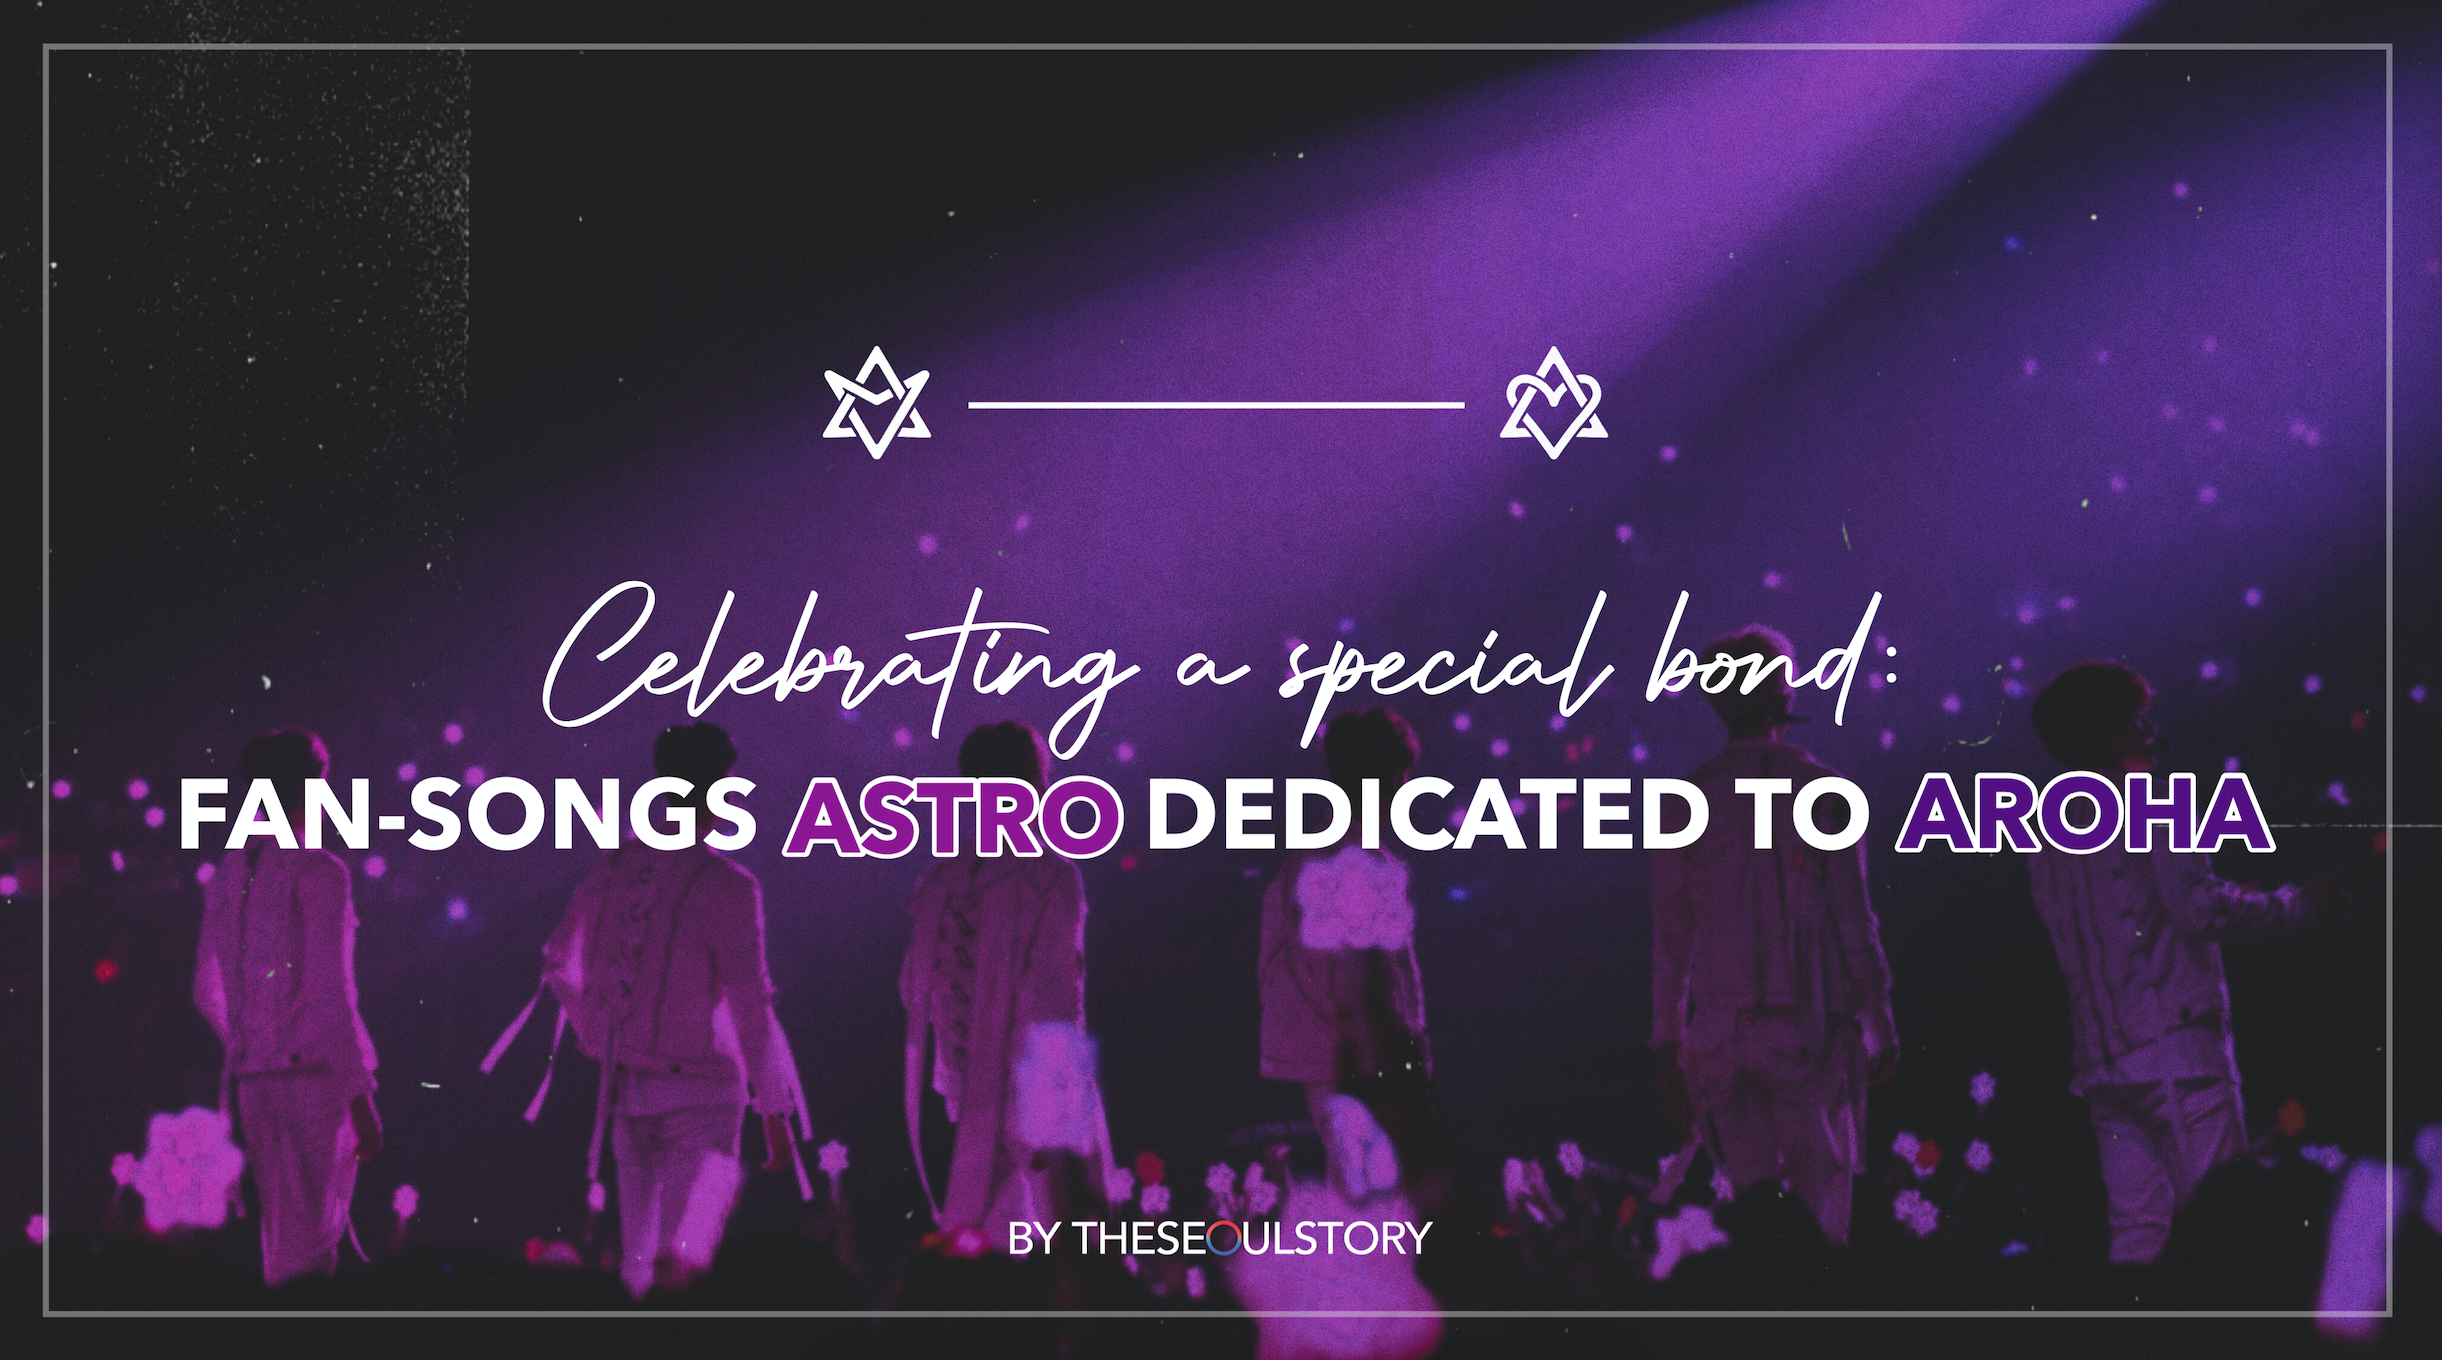 [FEATURE] Celebrating A Special Bond: Fan-Songs ASTRO Dedicated to AROHA